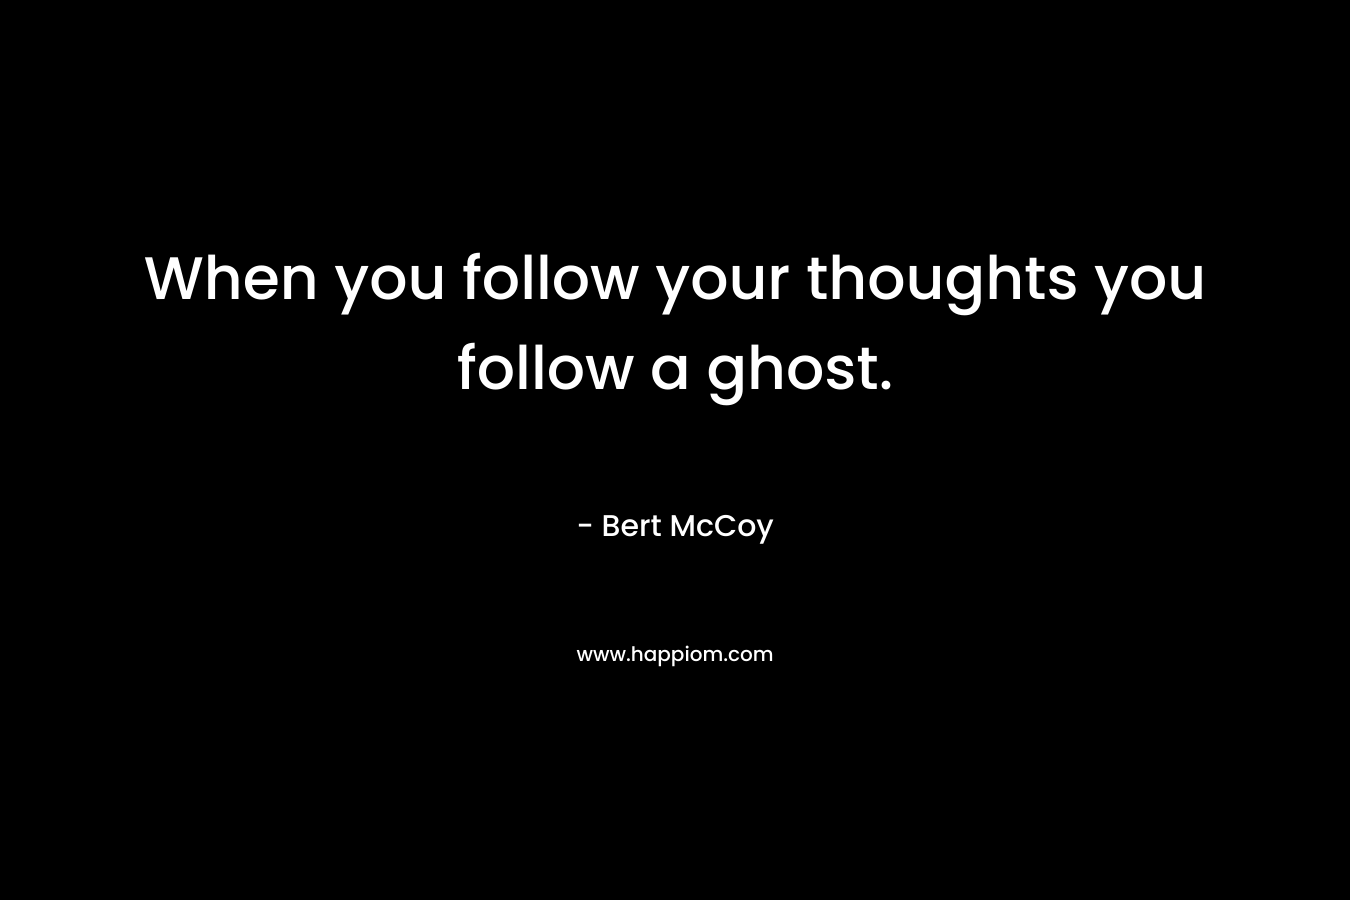 When you follow your thoughts you follow a ghost.